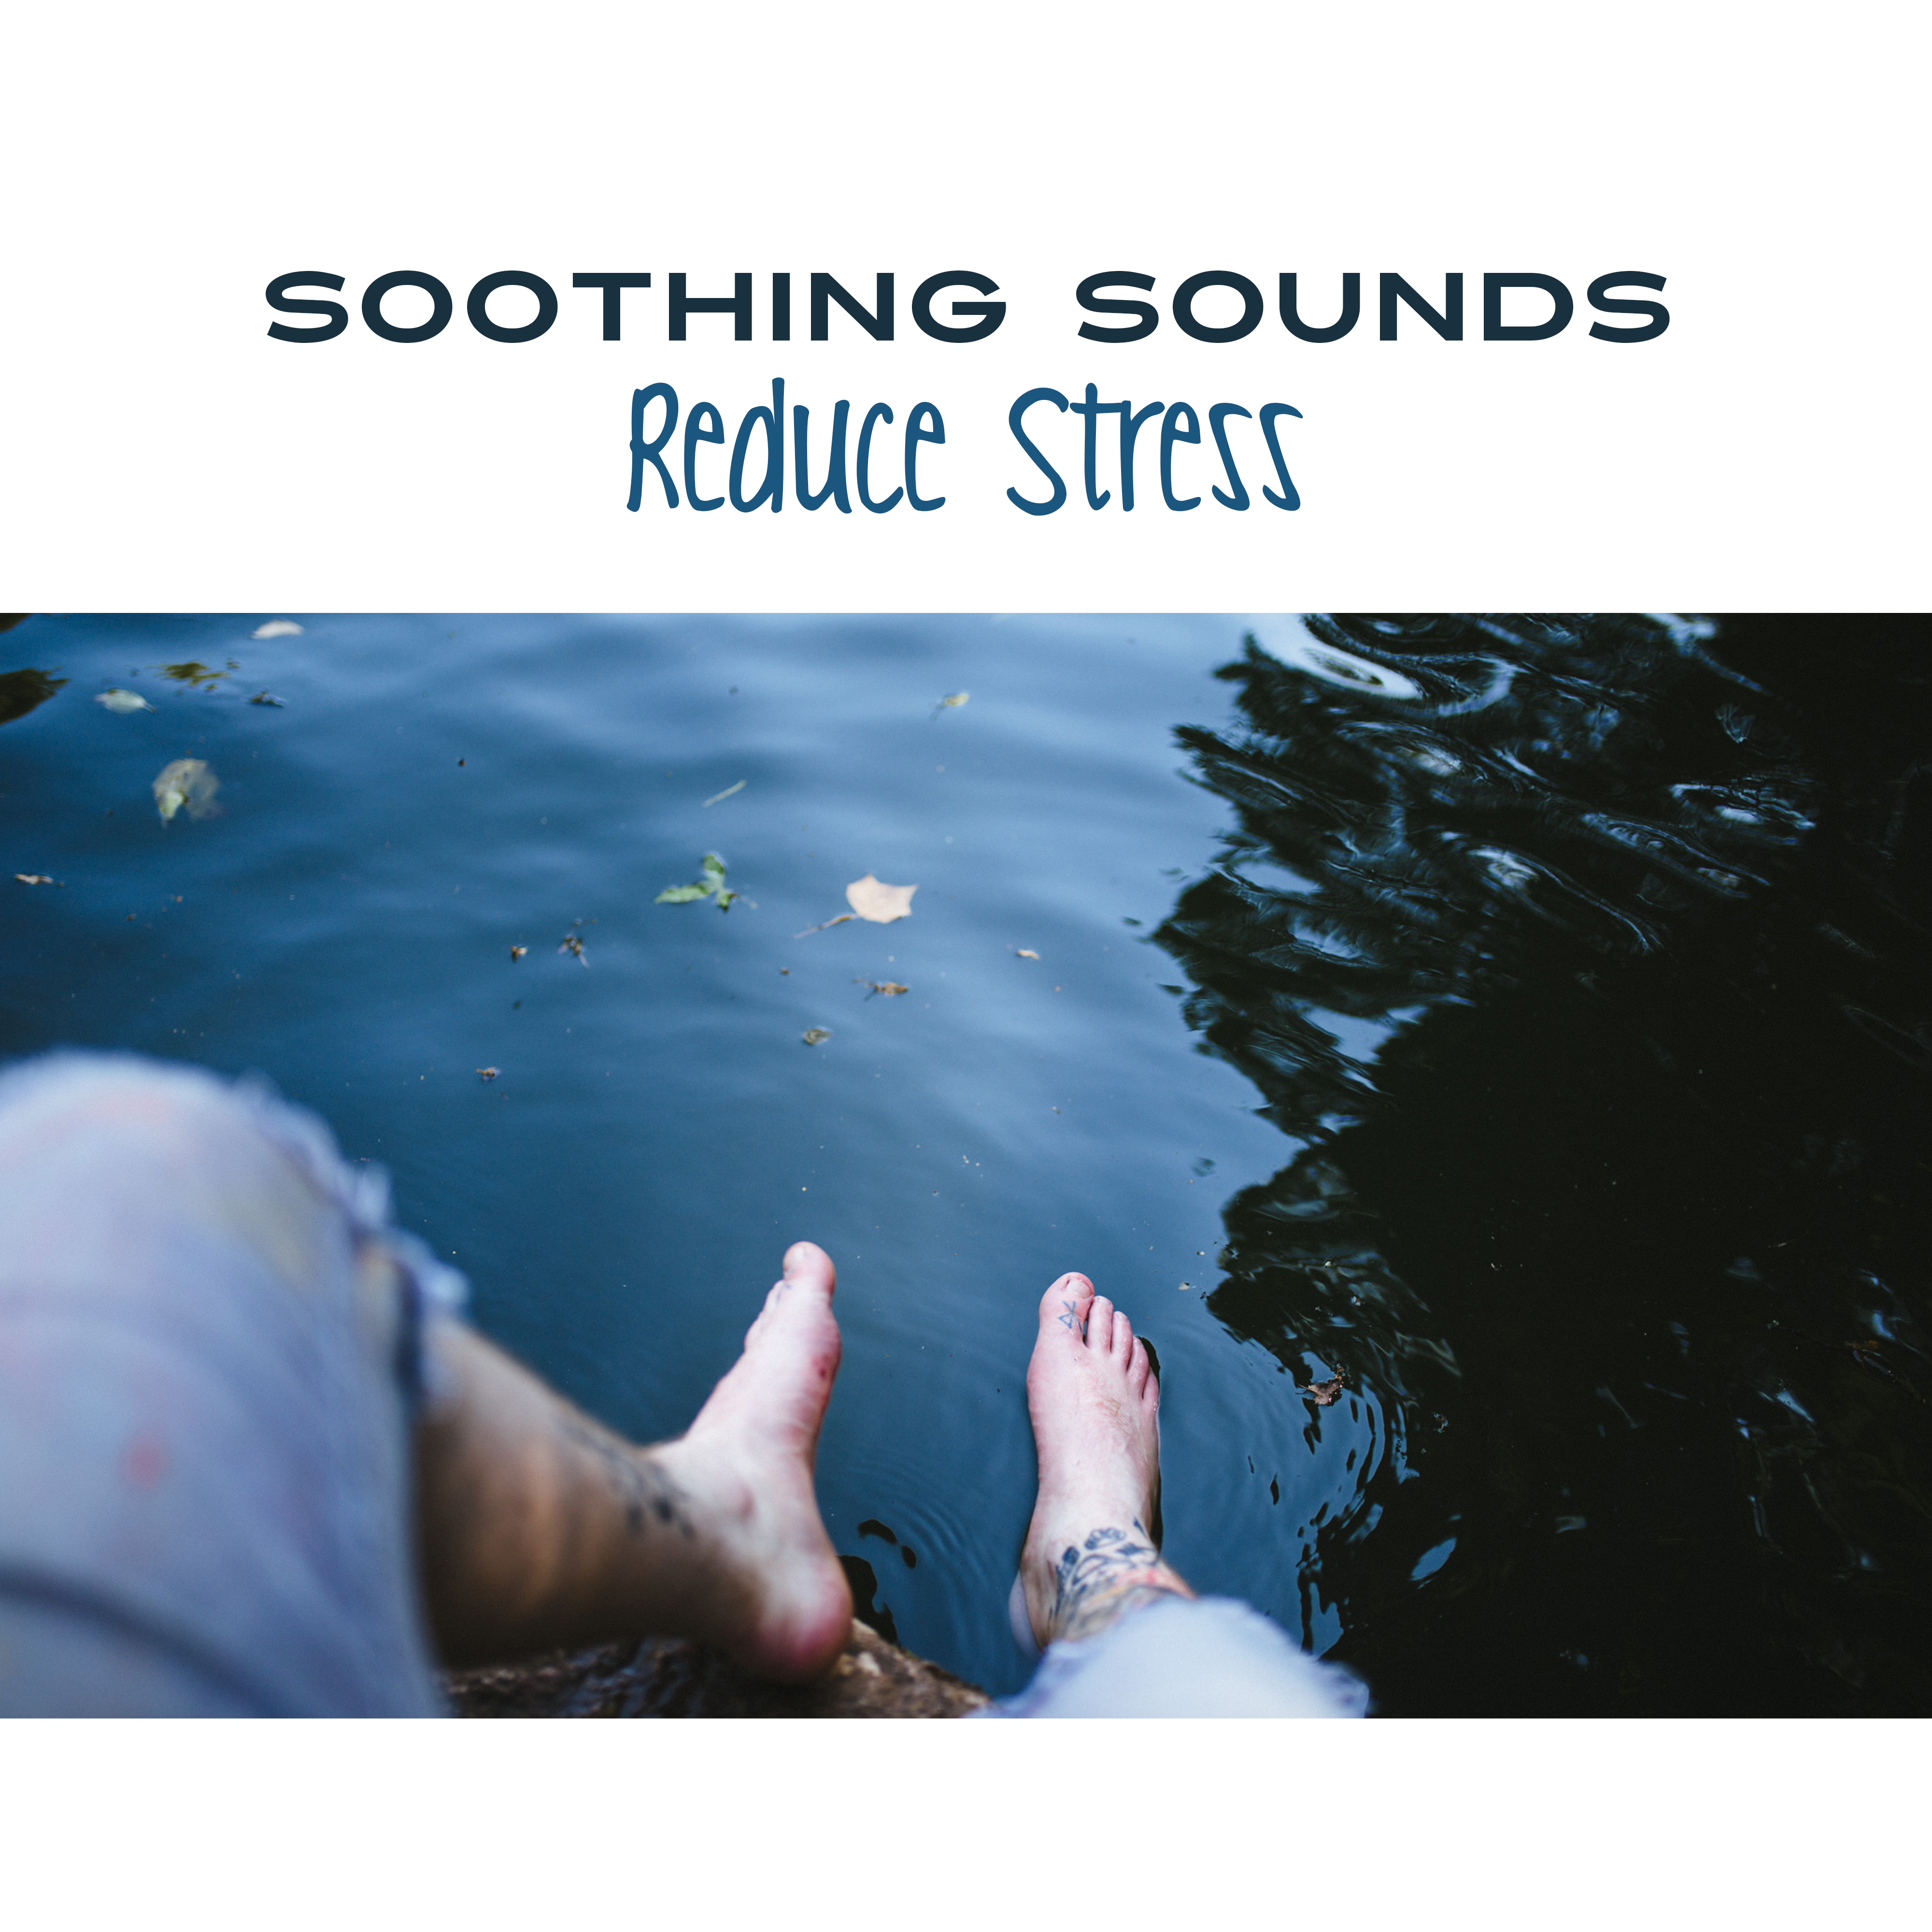 Soothing Sounds Reduce Stress – Pure Rest, Stress Relief, Peaceful Music for Relaxation, Healing, Sleep, Tranquility, Calm Down, Meditation